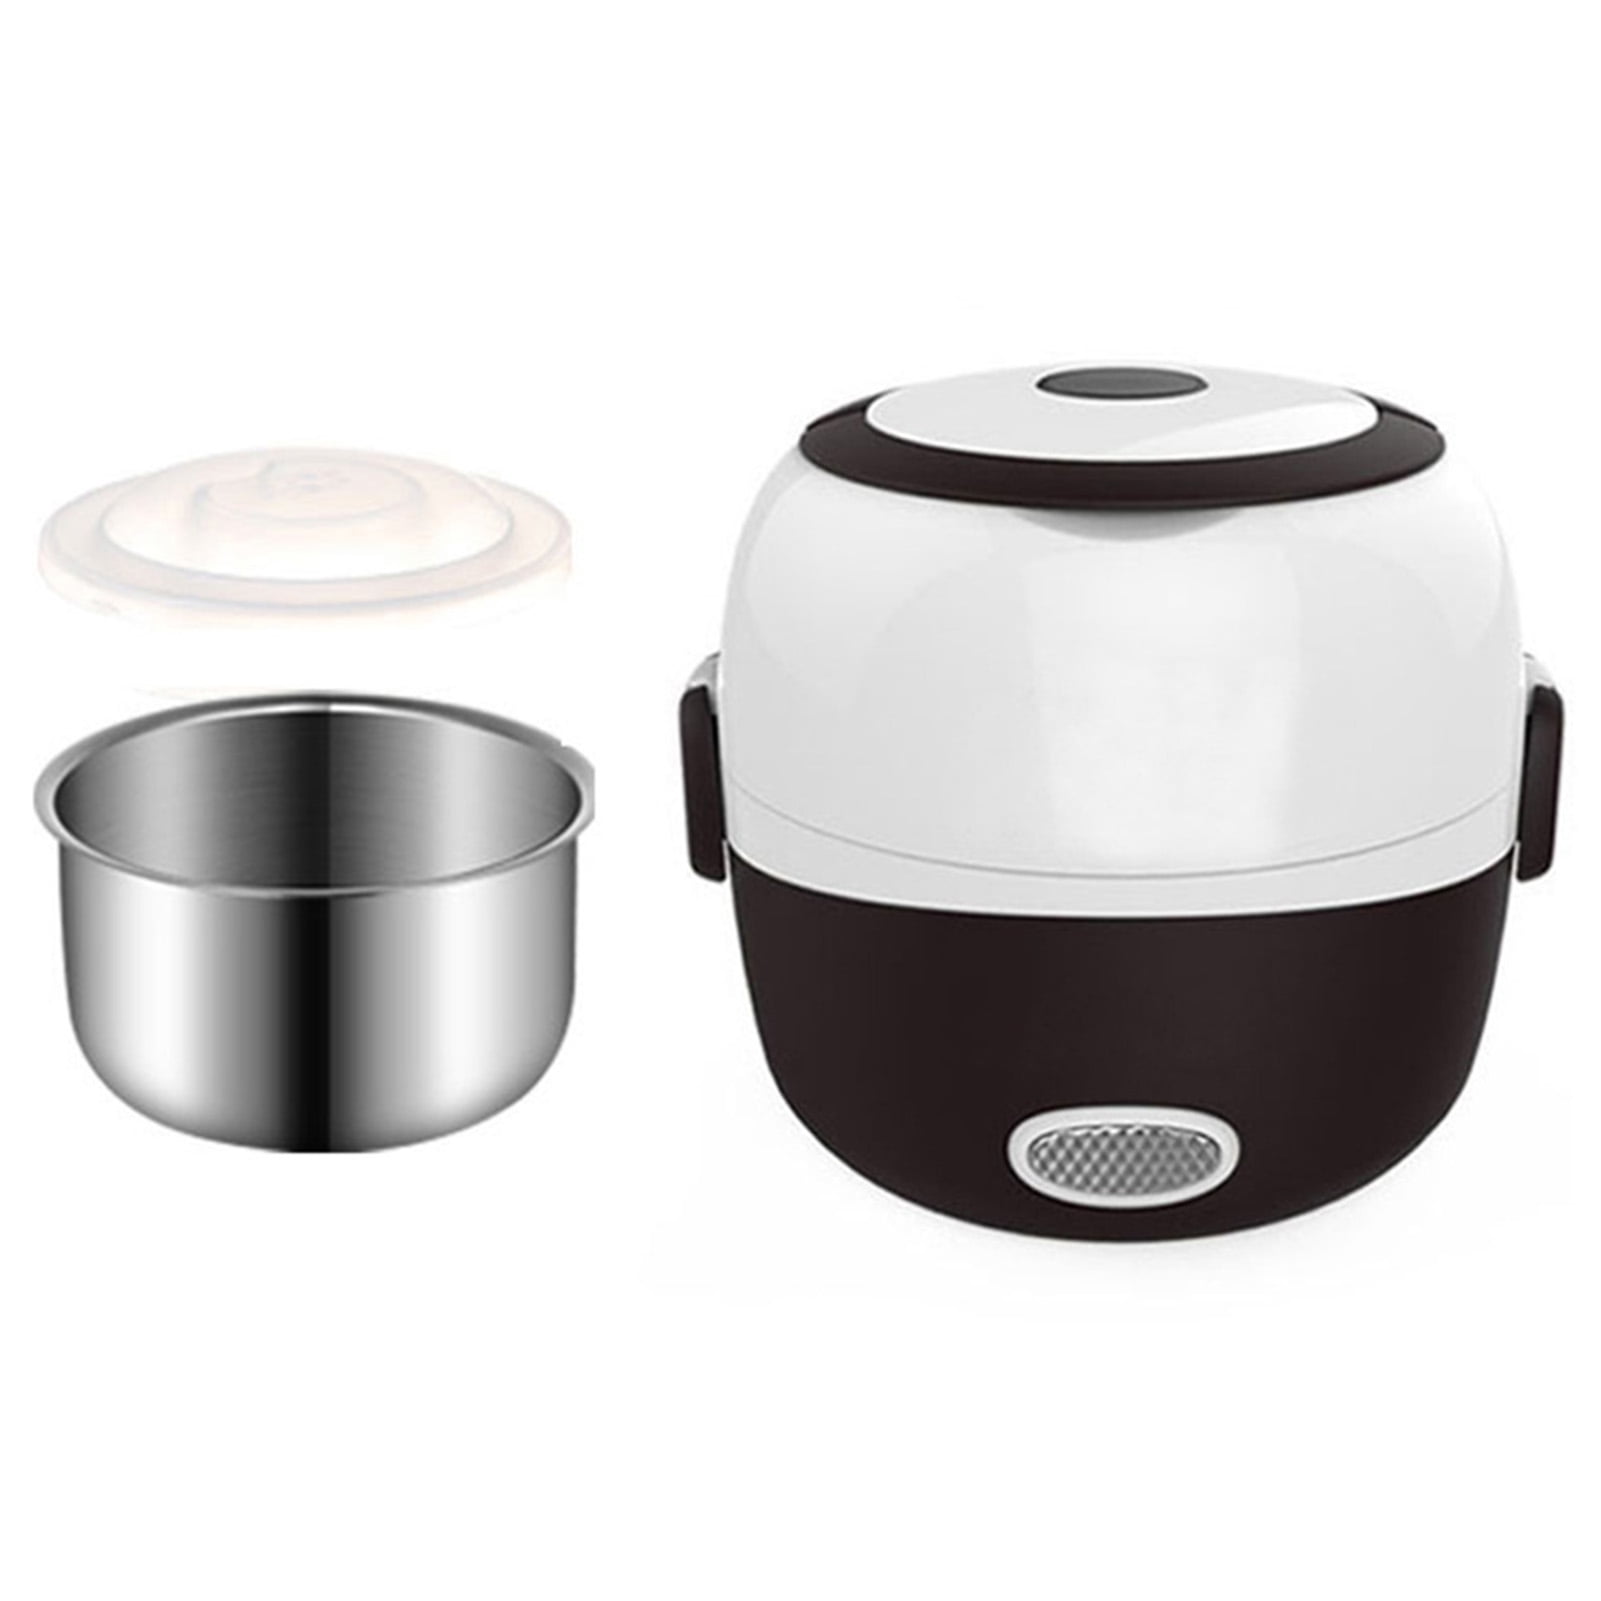 2 Layer Electric Portable Steamer Rice Cooker Food Heater Lunch Box